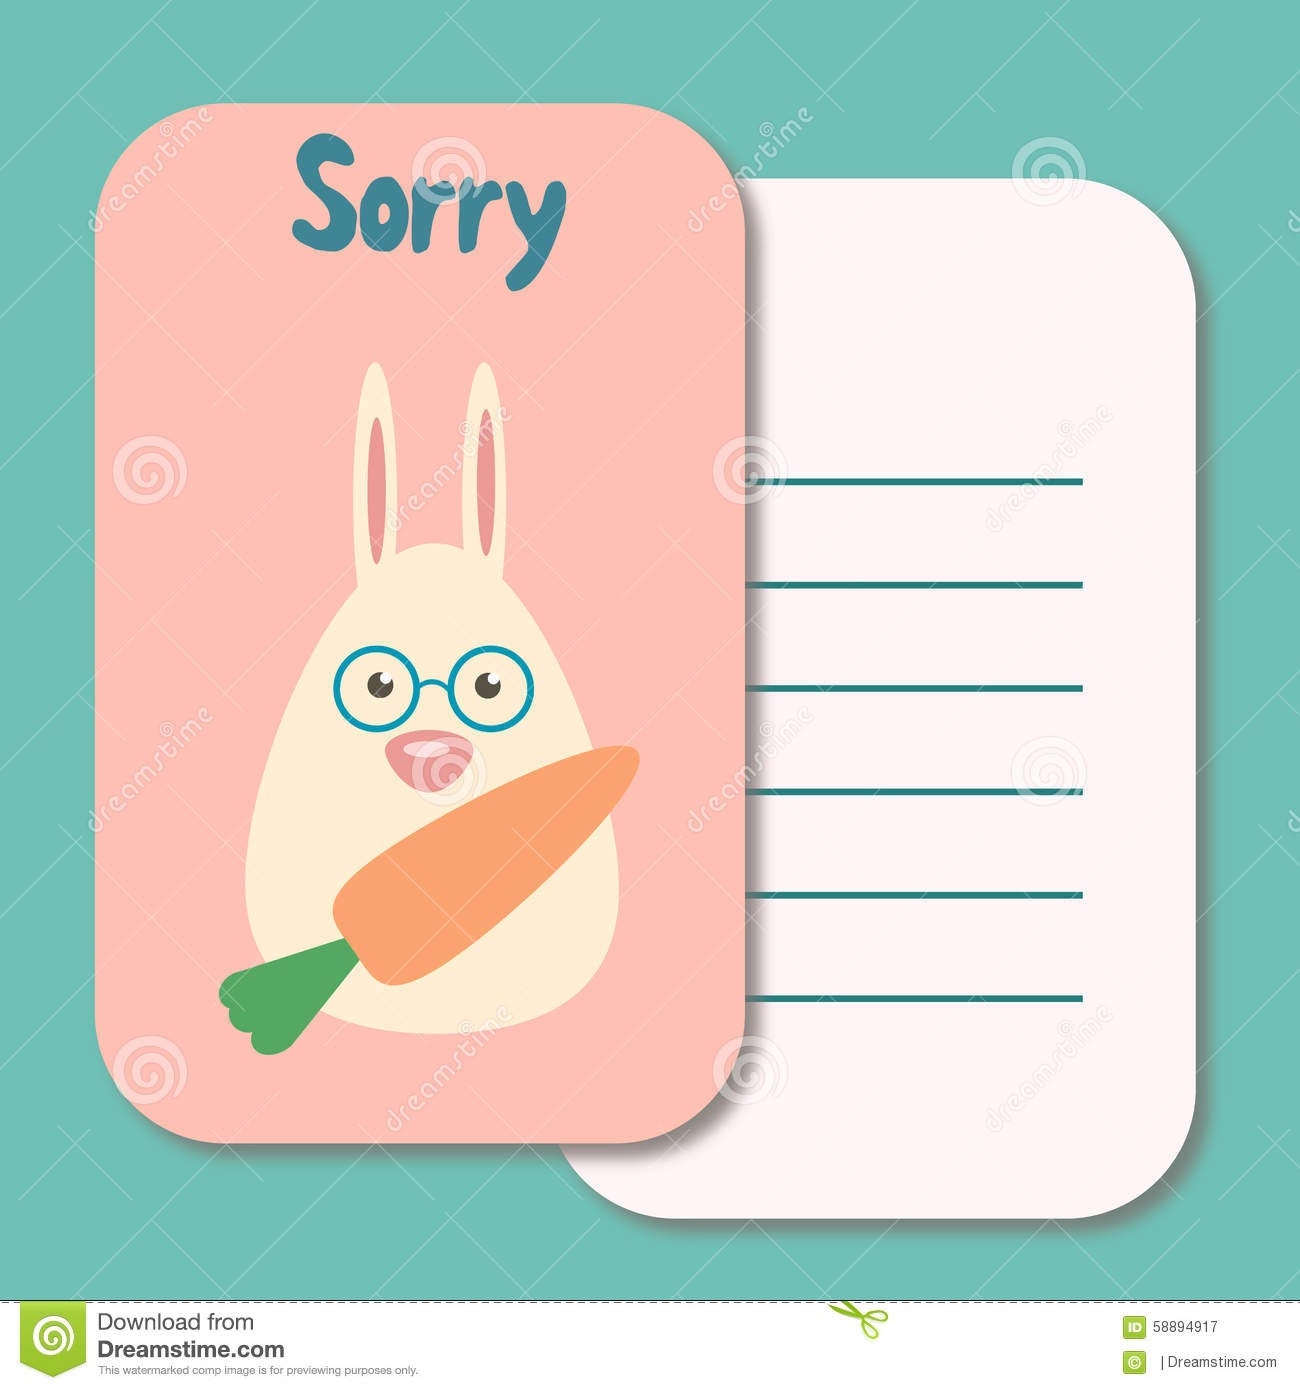 Cute Sorry Card Stock Illustration. Illustration Of Parchment - 58894917 - Free Printable Apology Cards